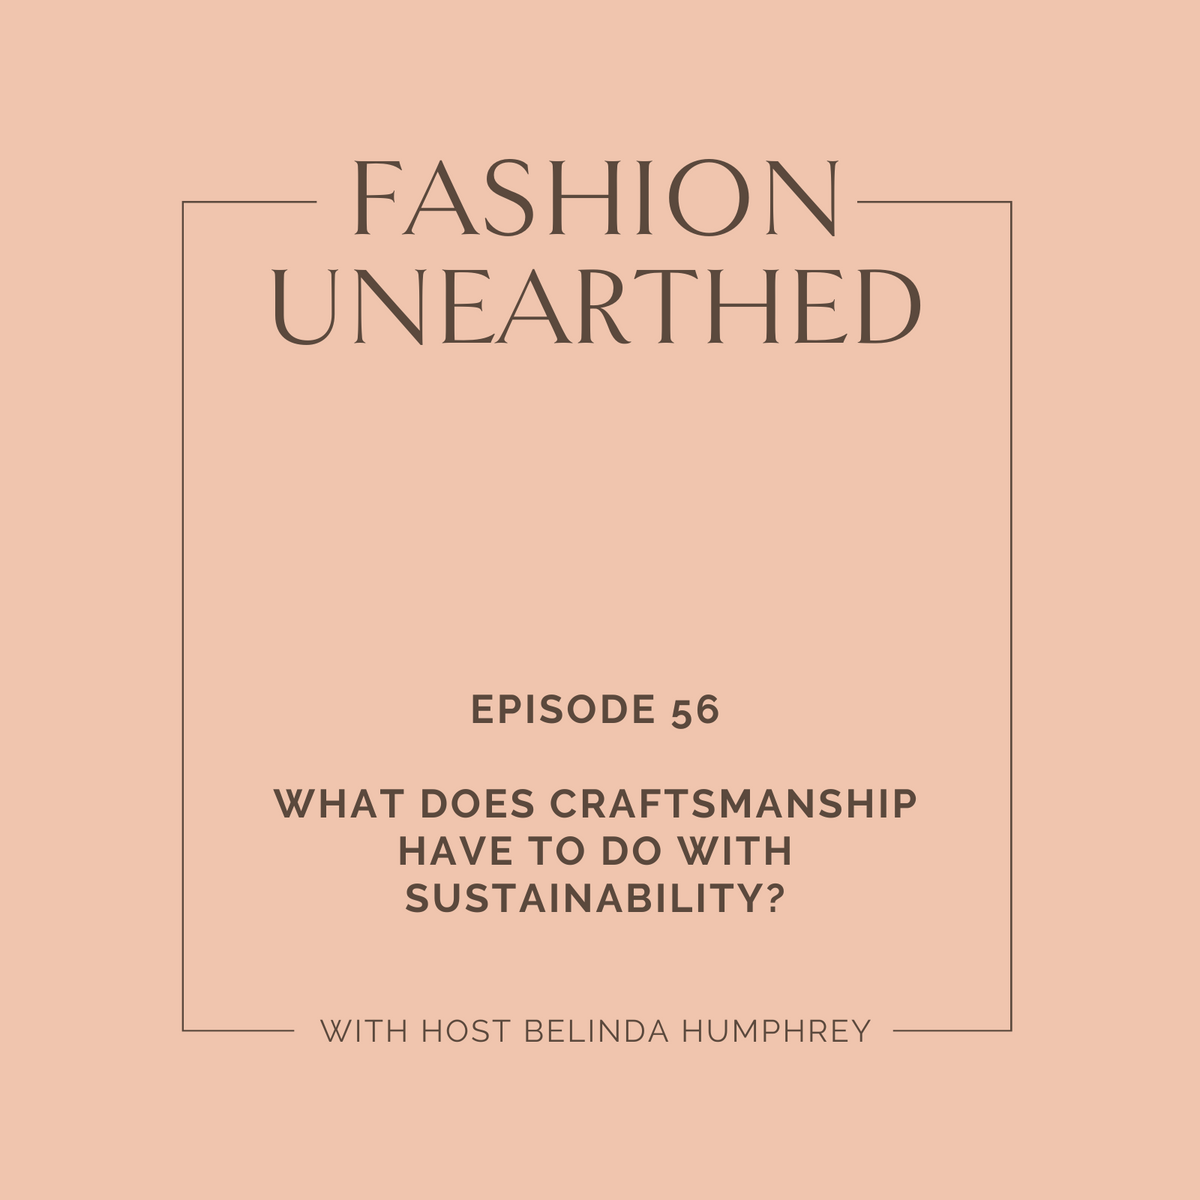 EPISODE 56: What does craftsmanship have to do with Sustainability?